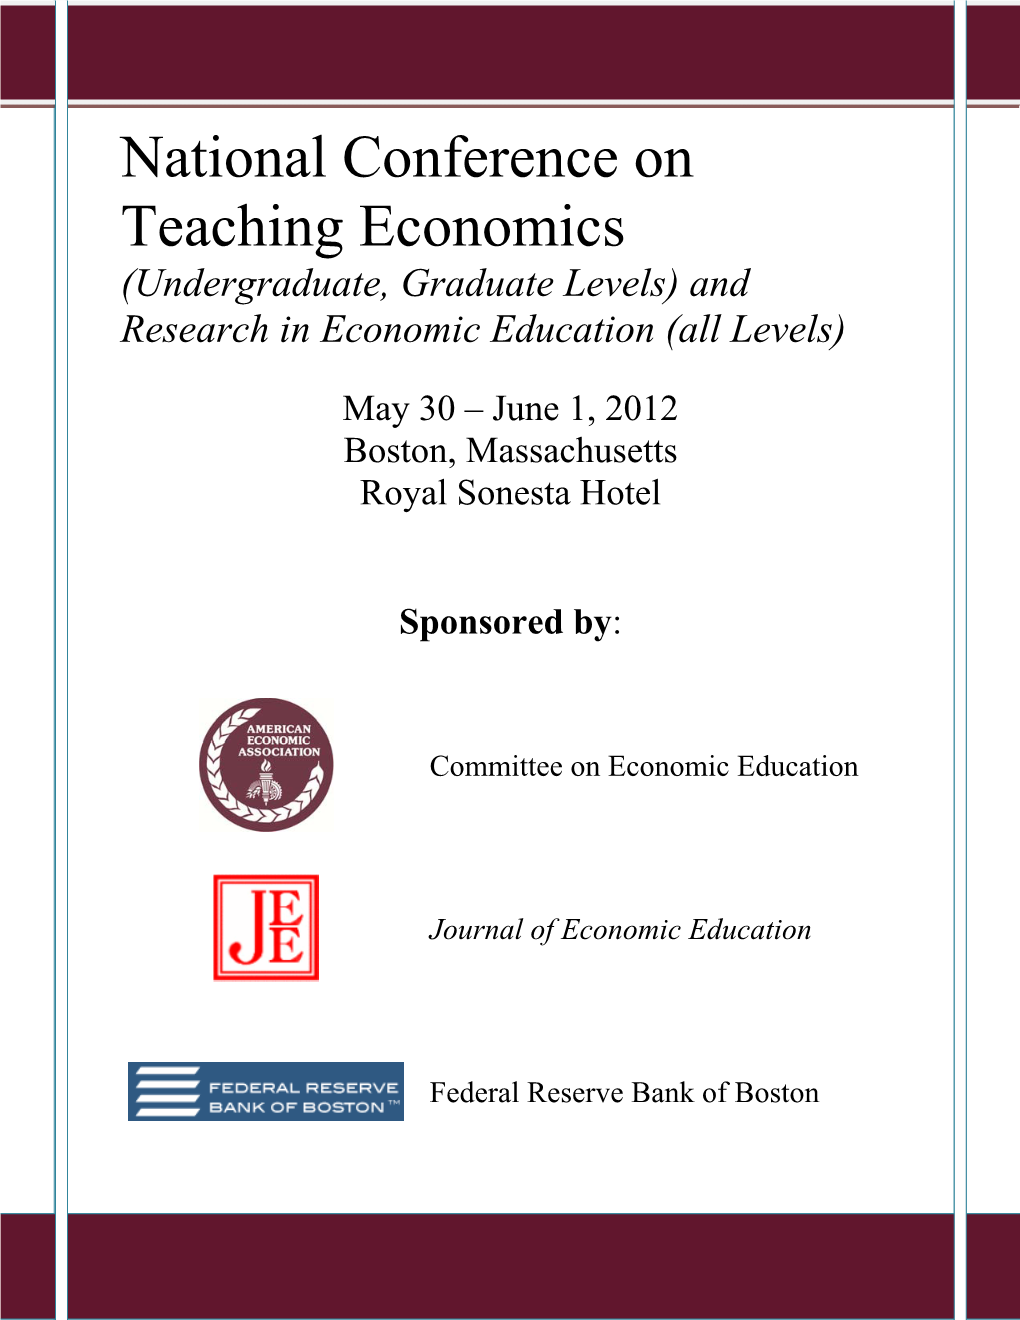 National Conference on Teaching Economics (Undergraduate, Graduate Levels) and Research in Economic Education (All Levels)